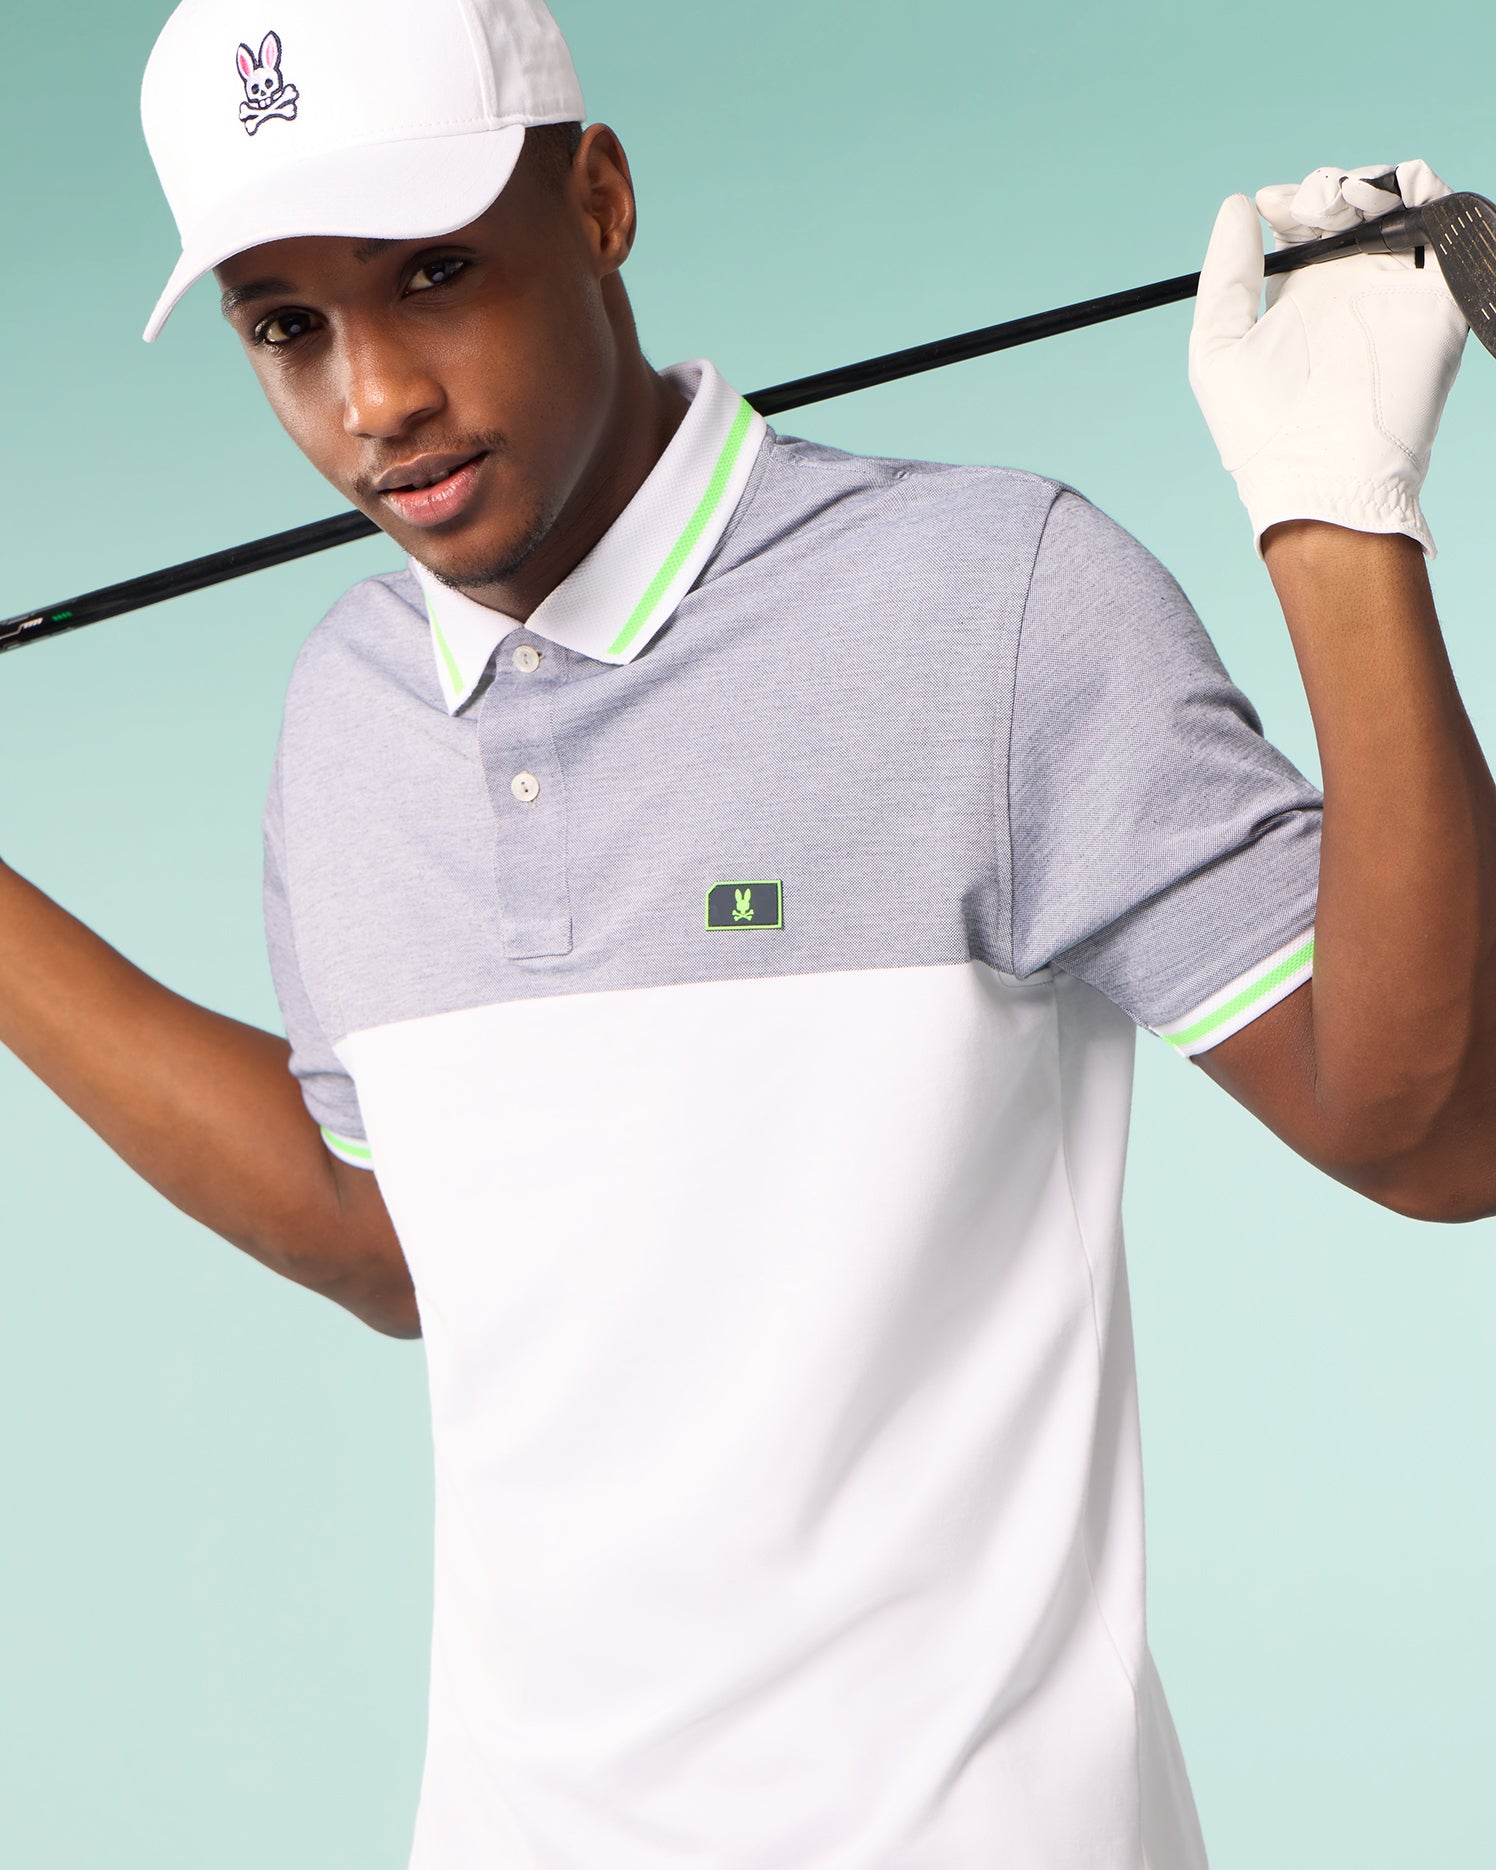 A man in a Psycho Bunny MENS SYRACUSE SPORT POLO SHIRT - B6K341B200 with green accents and a small green logo stands holding a golf club behind his neck. He also wears a white cap with a pink bunny logo and a white golf glove on one hand. The background is a solid light teal color.